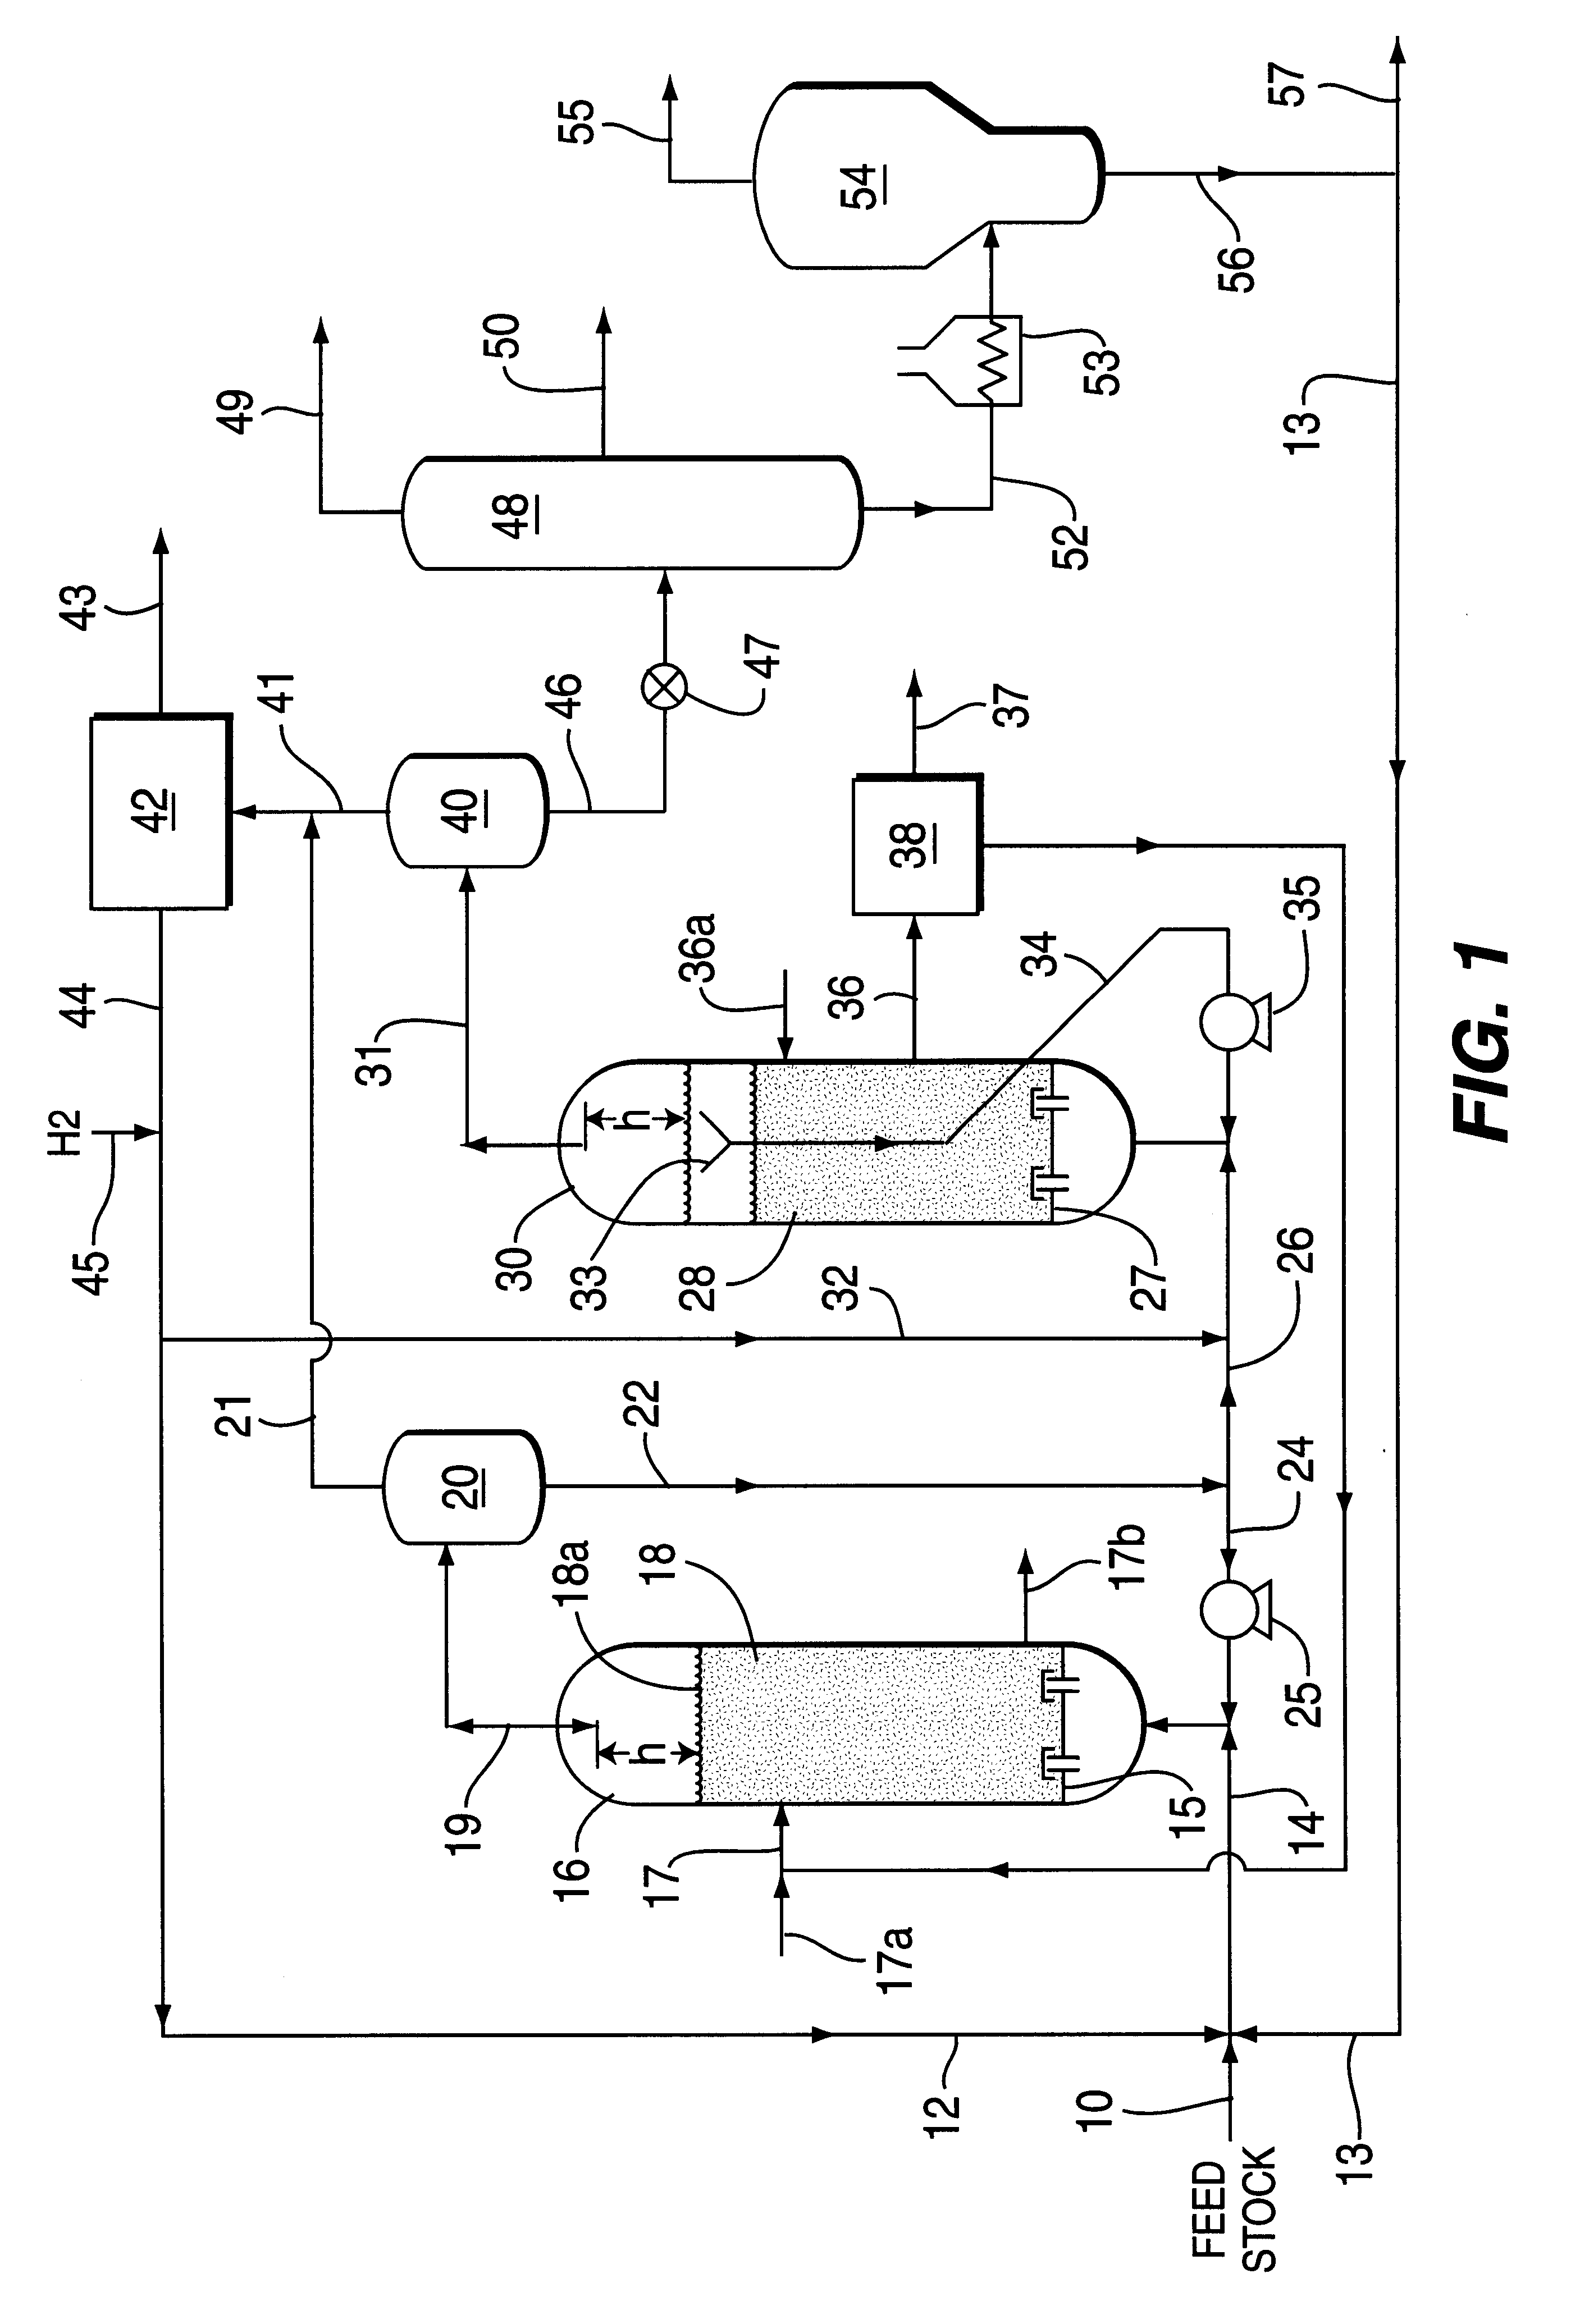 Catalytic hydrogenation process utilizing multi-stage ebullated bed reactors